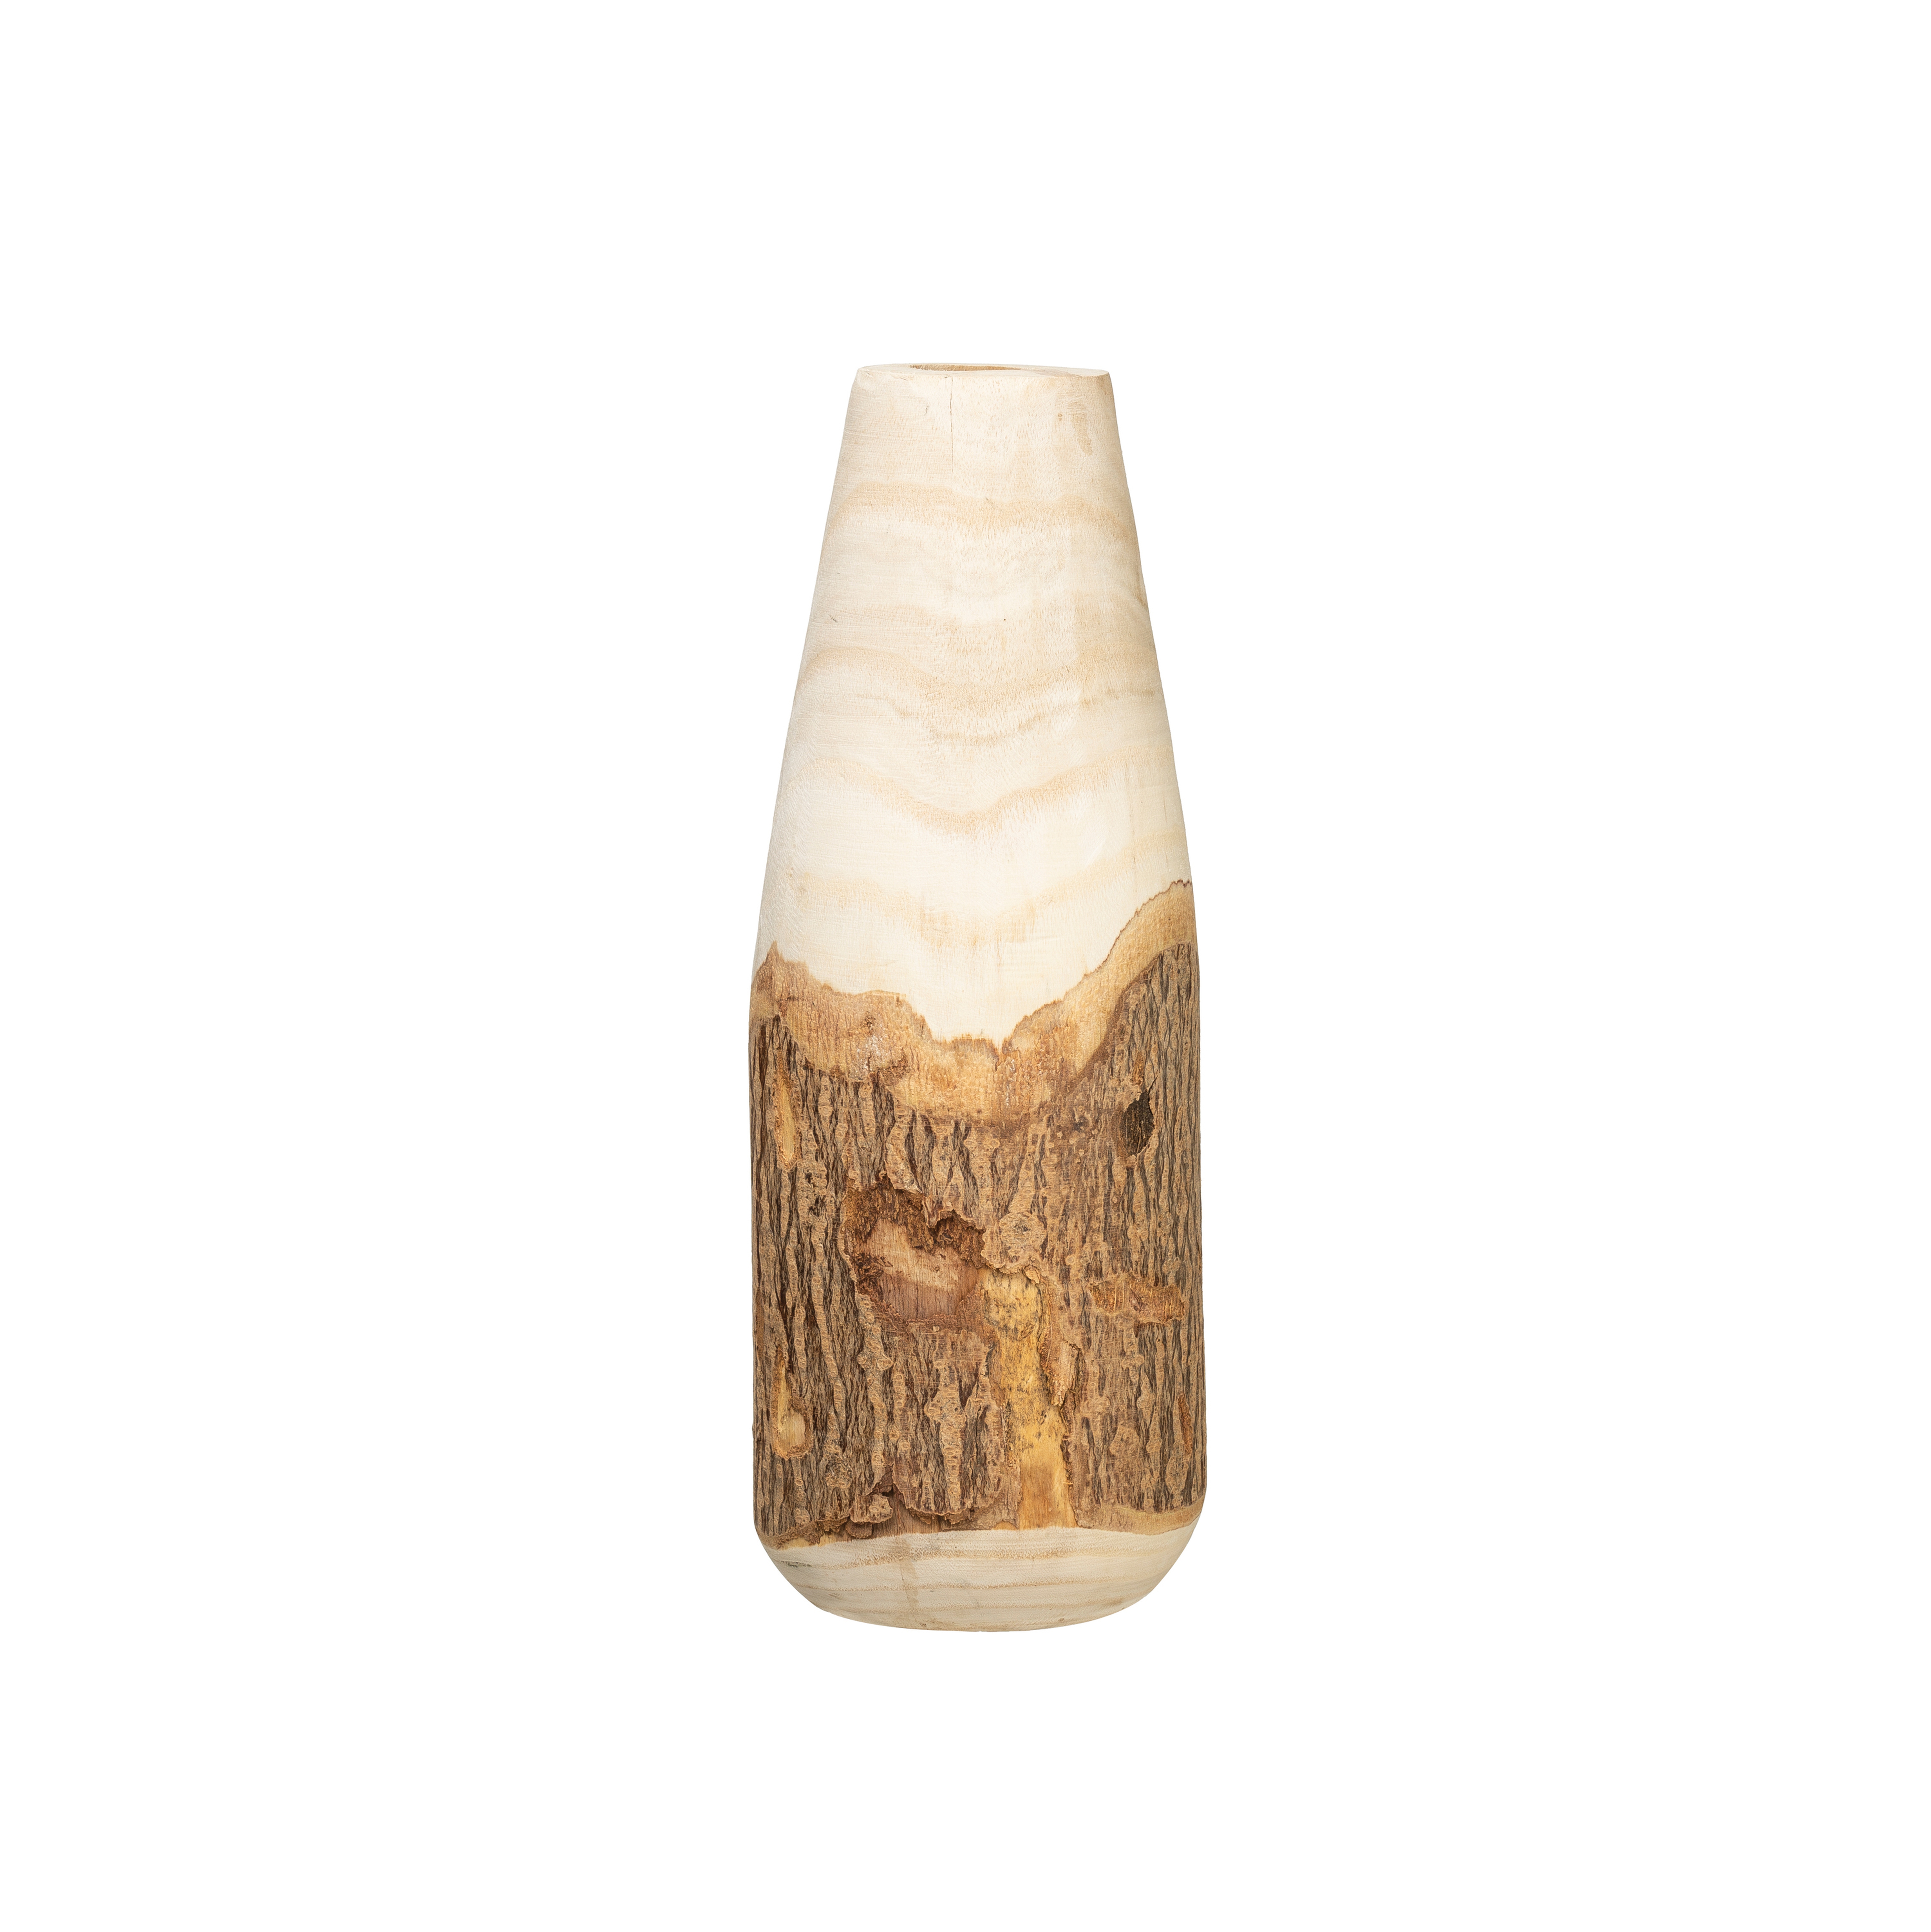 Carved Paulownia Wood Vase with Live Edge (Each one will vary) - Nomad Home